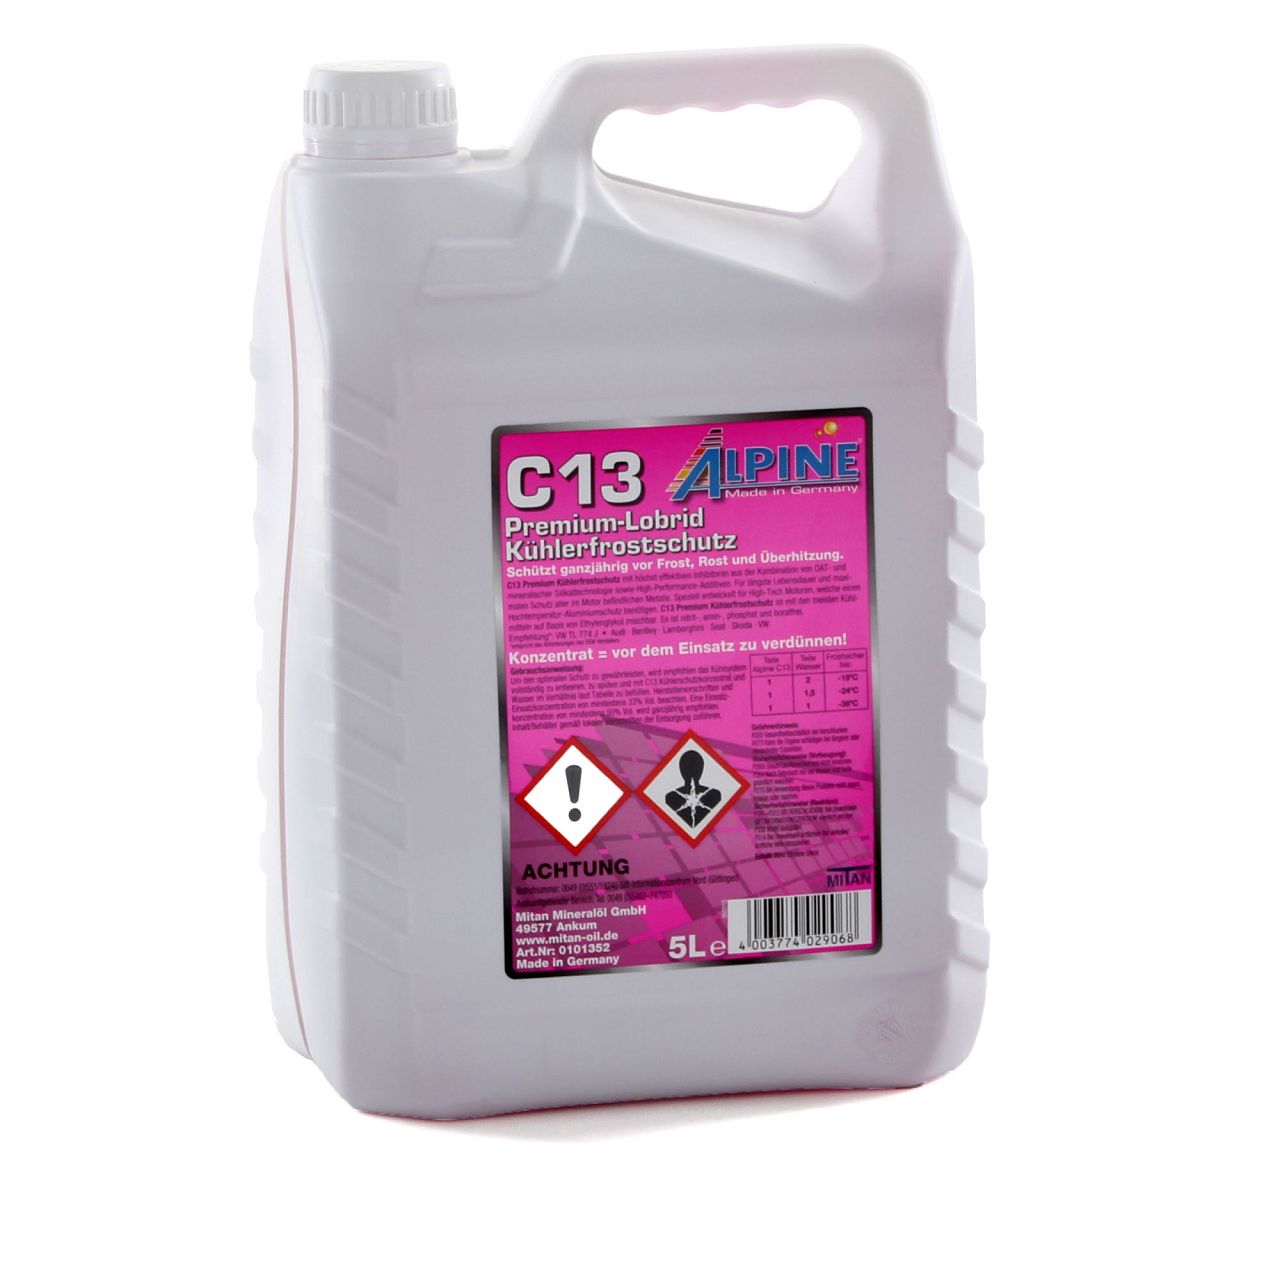 On display is a radiator antifreeze concentrate C13 in purple from the brand Alpine